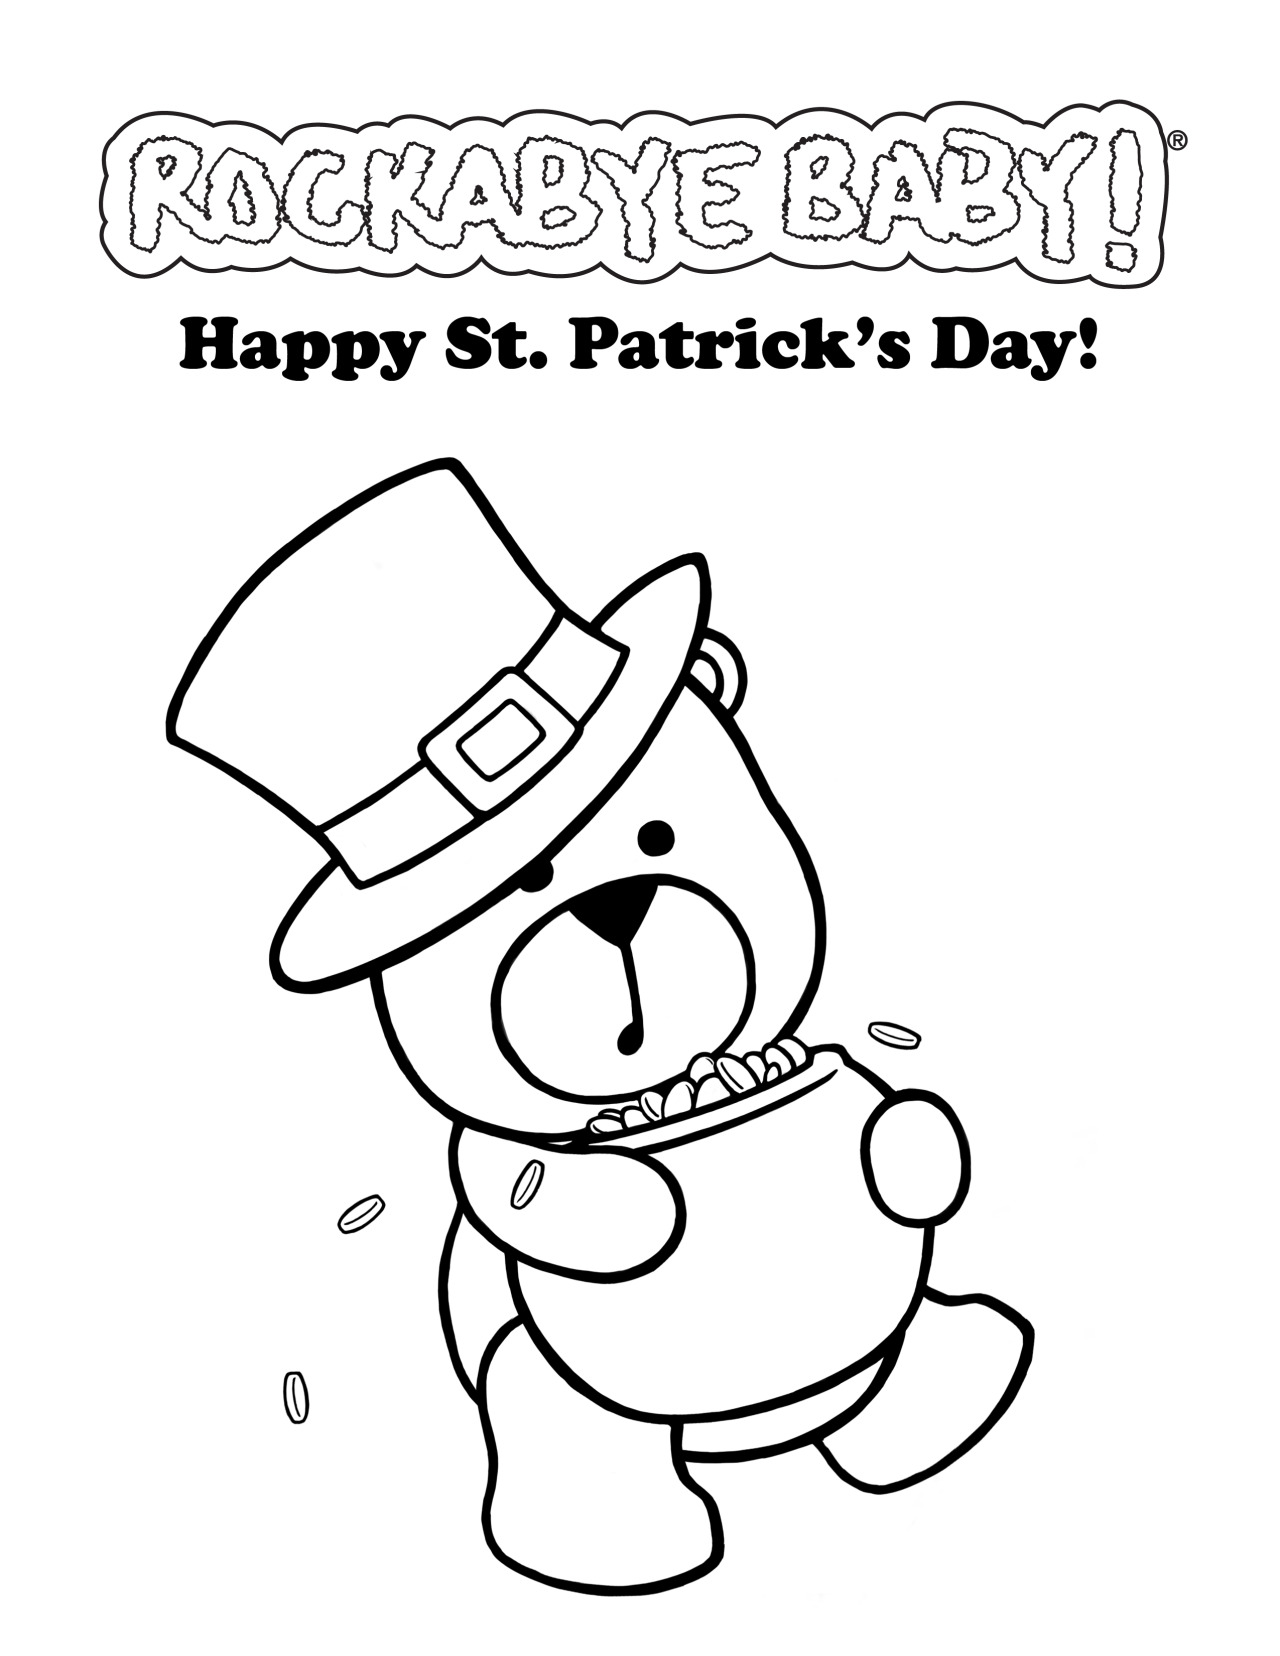 Happy st patricks day coloring pages â rockabye baby